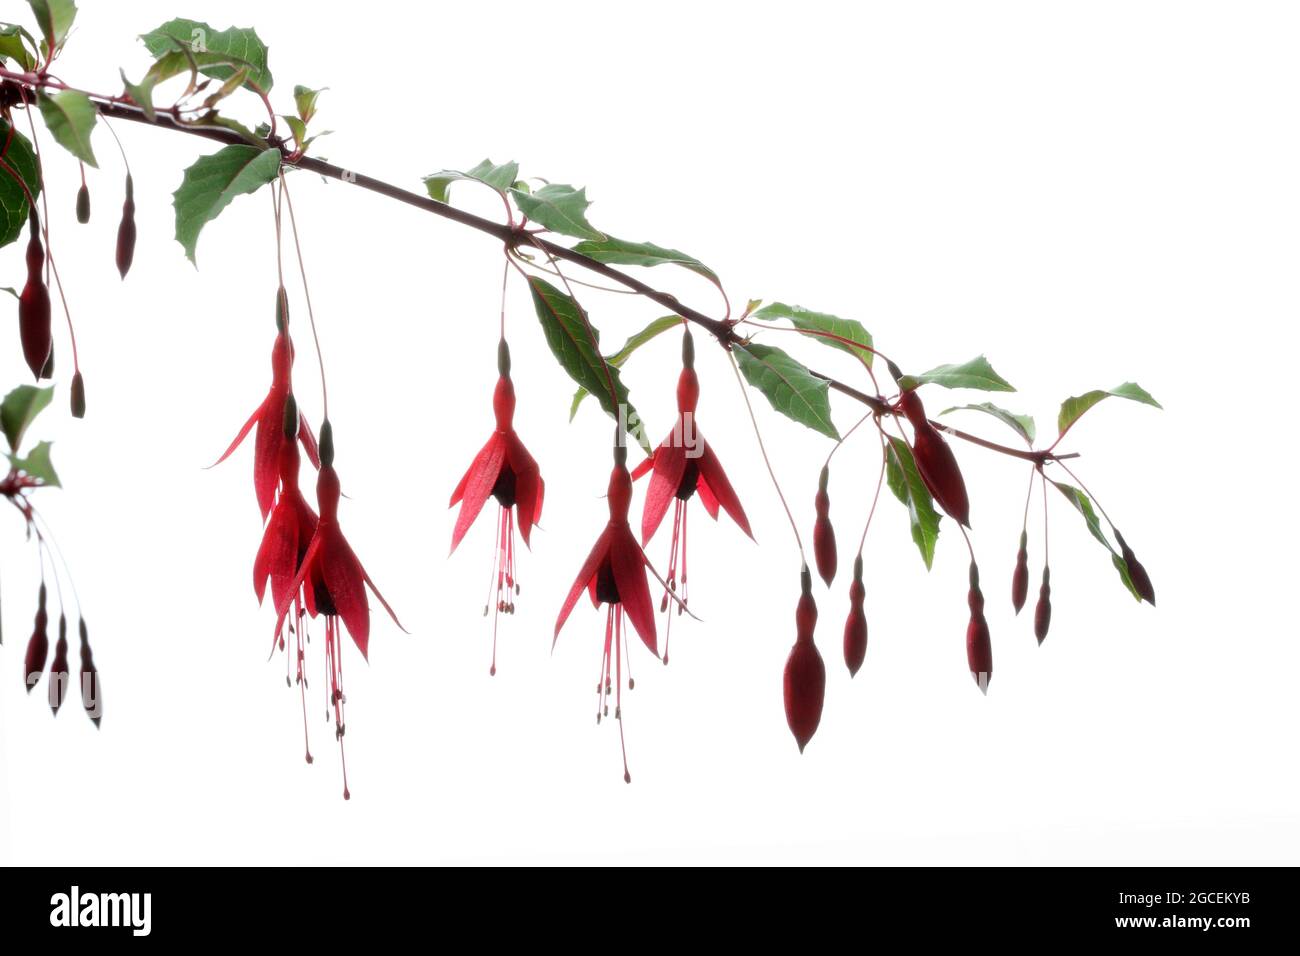 Flowering fuschia shrub with red and purple pendulous open flowers photographed against a white background Stock Photo